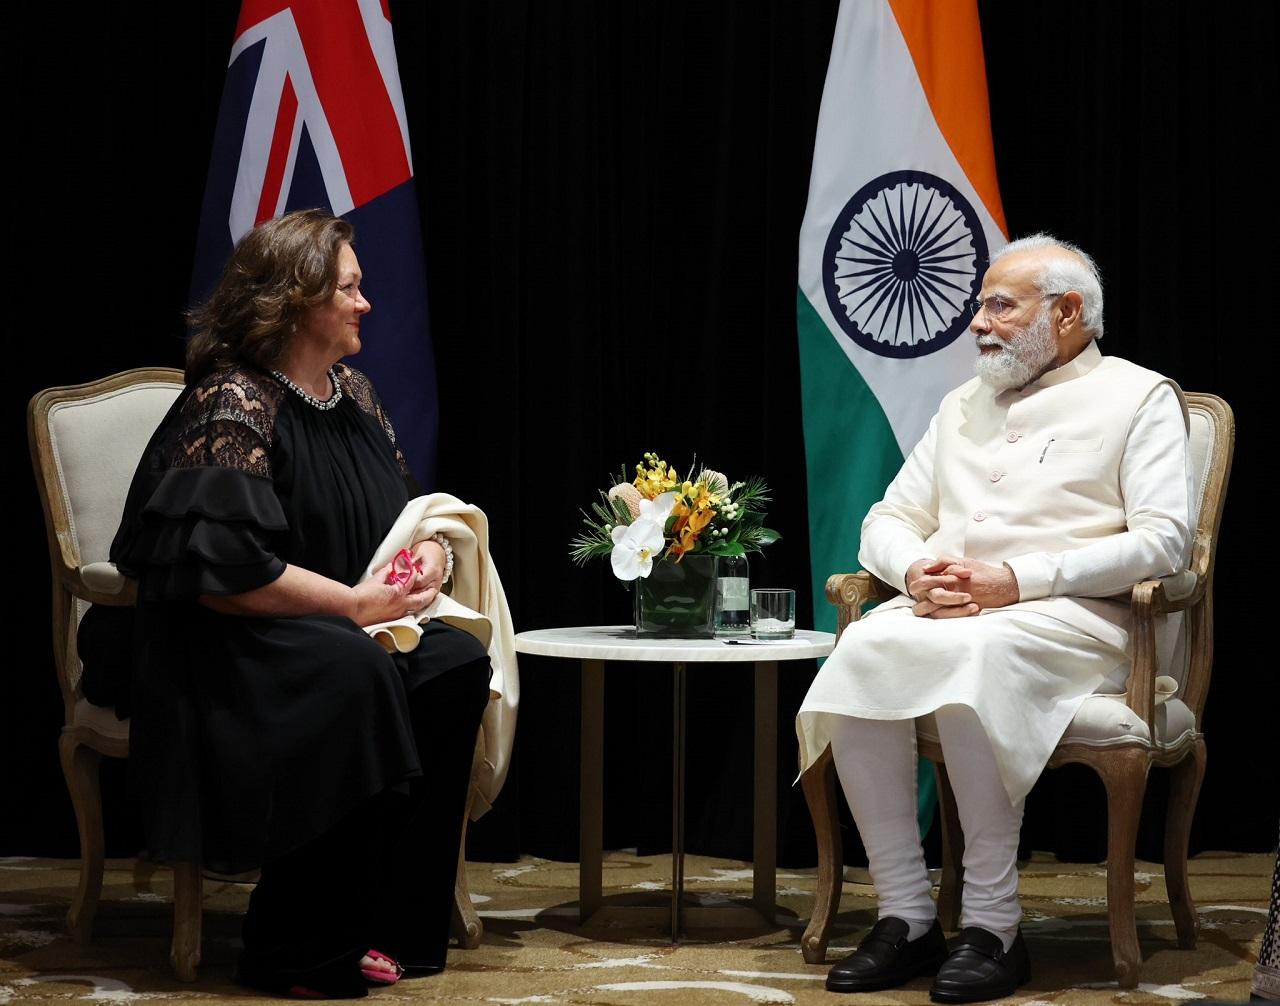 During his meeting with Rinehart, the prime minister highlighted the reforms and initiatives being undertaken in India and invited her to partner in technology, investment and skilling in the mining and minerals sector, a statement by the Ministry of External Affairs in New Delhi said